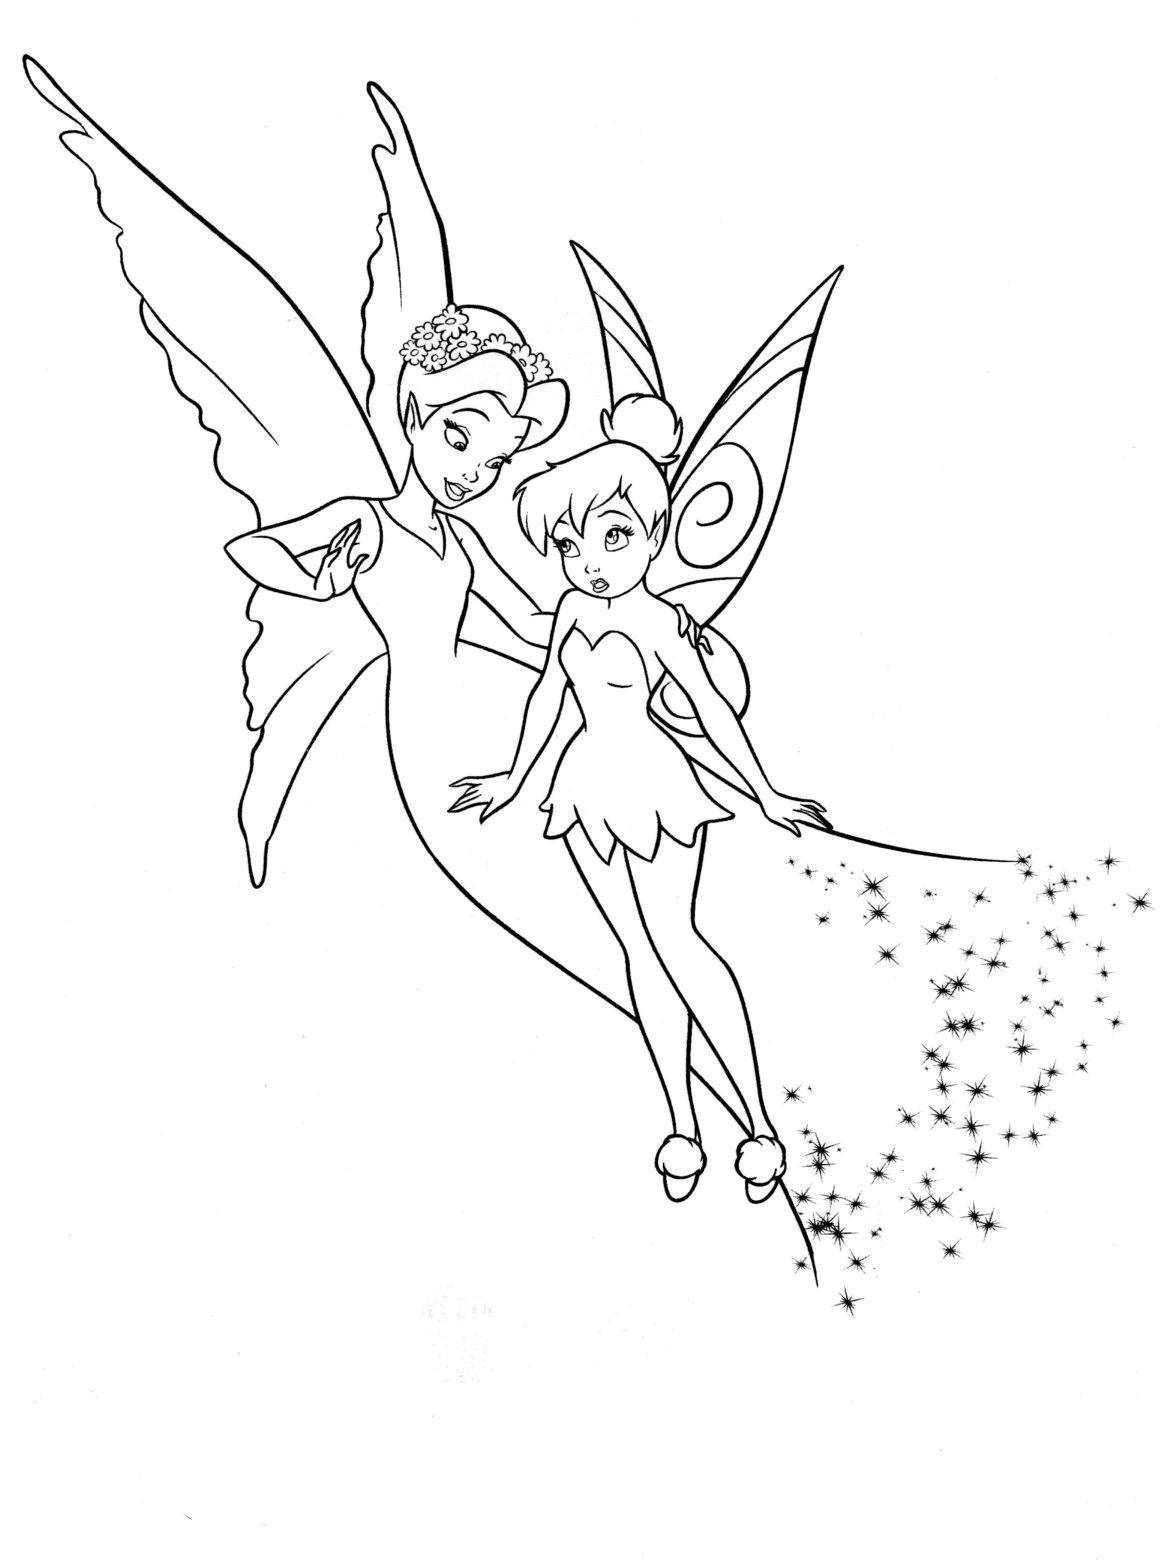 Coloring Tinker bell and Queen of the fairies. Category fairies. Tags:  fairy, Dindin.